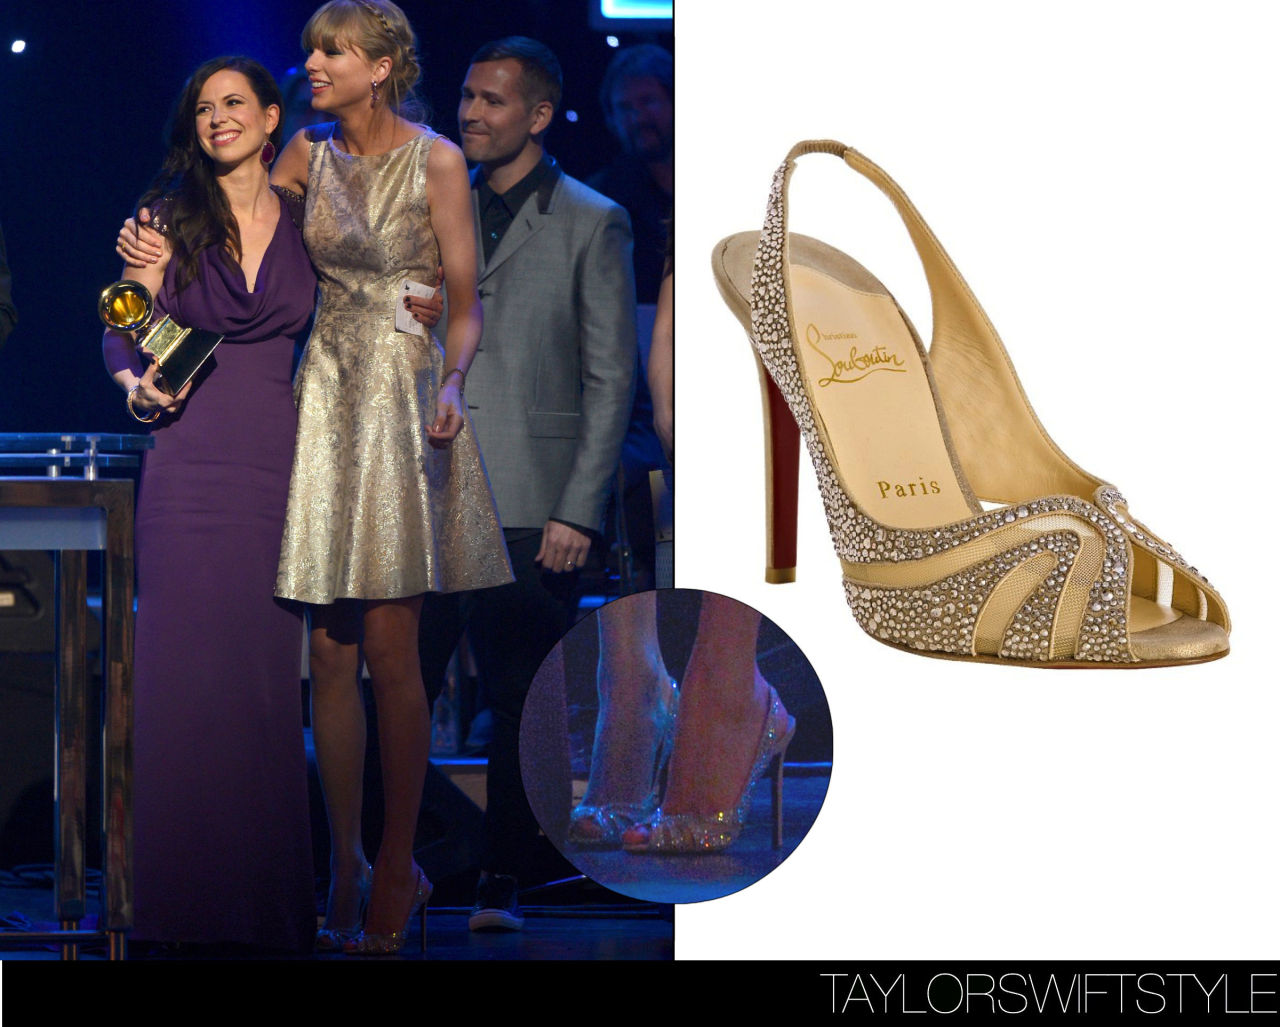 The 55th Annual GRAMMY Awards Pre-Telecast | Los Angeles, CA | February 10, 2013Christian Louboutin &#8216;Alta Rita Sandals&#8217; - no longer availableTaylor celebrates her GRAMMY win with co-writer Joy Williams of The Civil Wars for &#8220;Safe and Sound&#8221;.Worn with: Jenny Packham dress